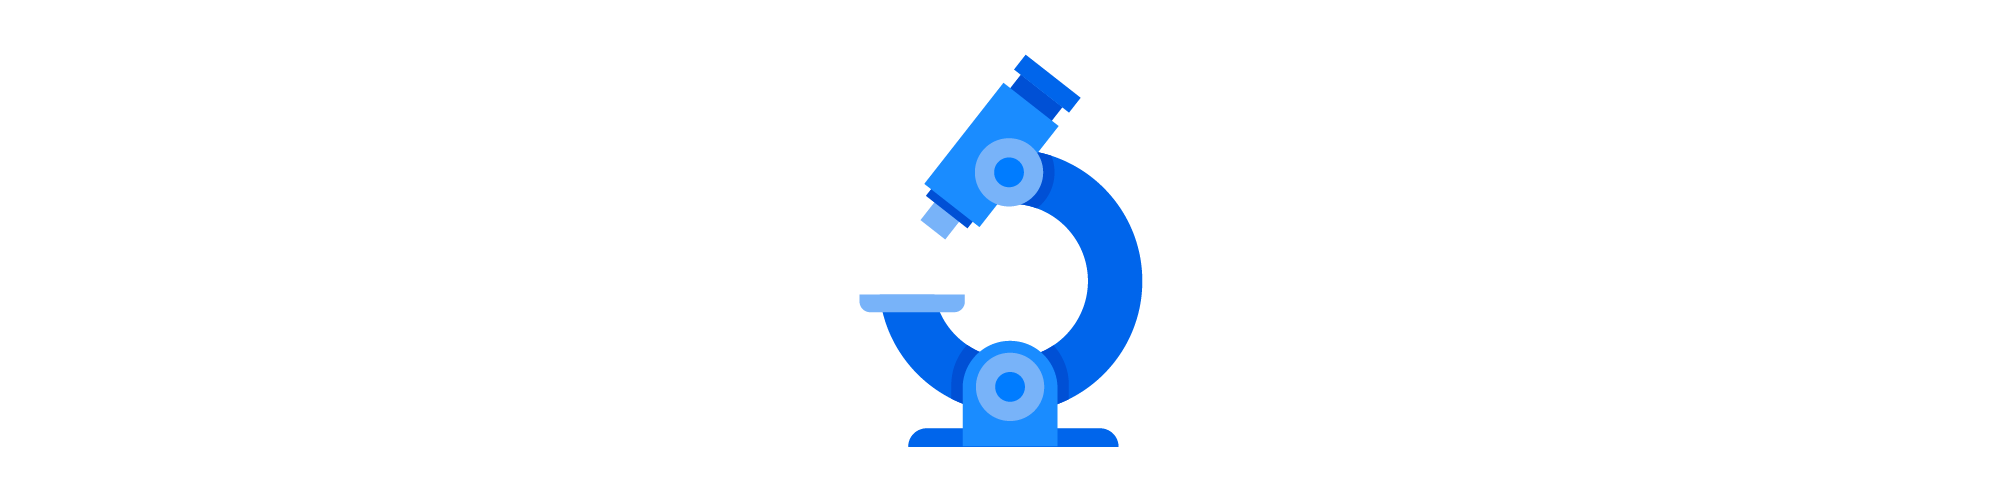 Illustrated icon of a microscope